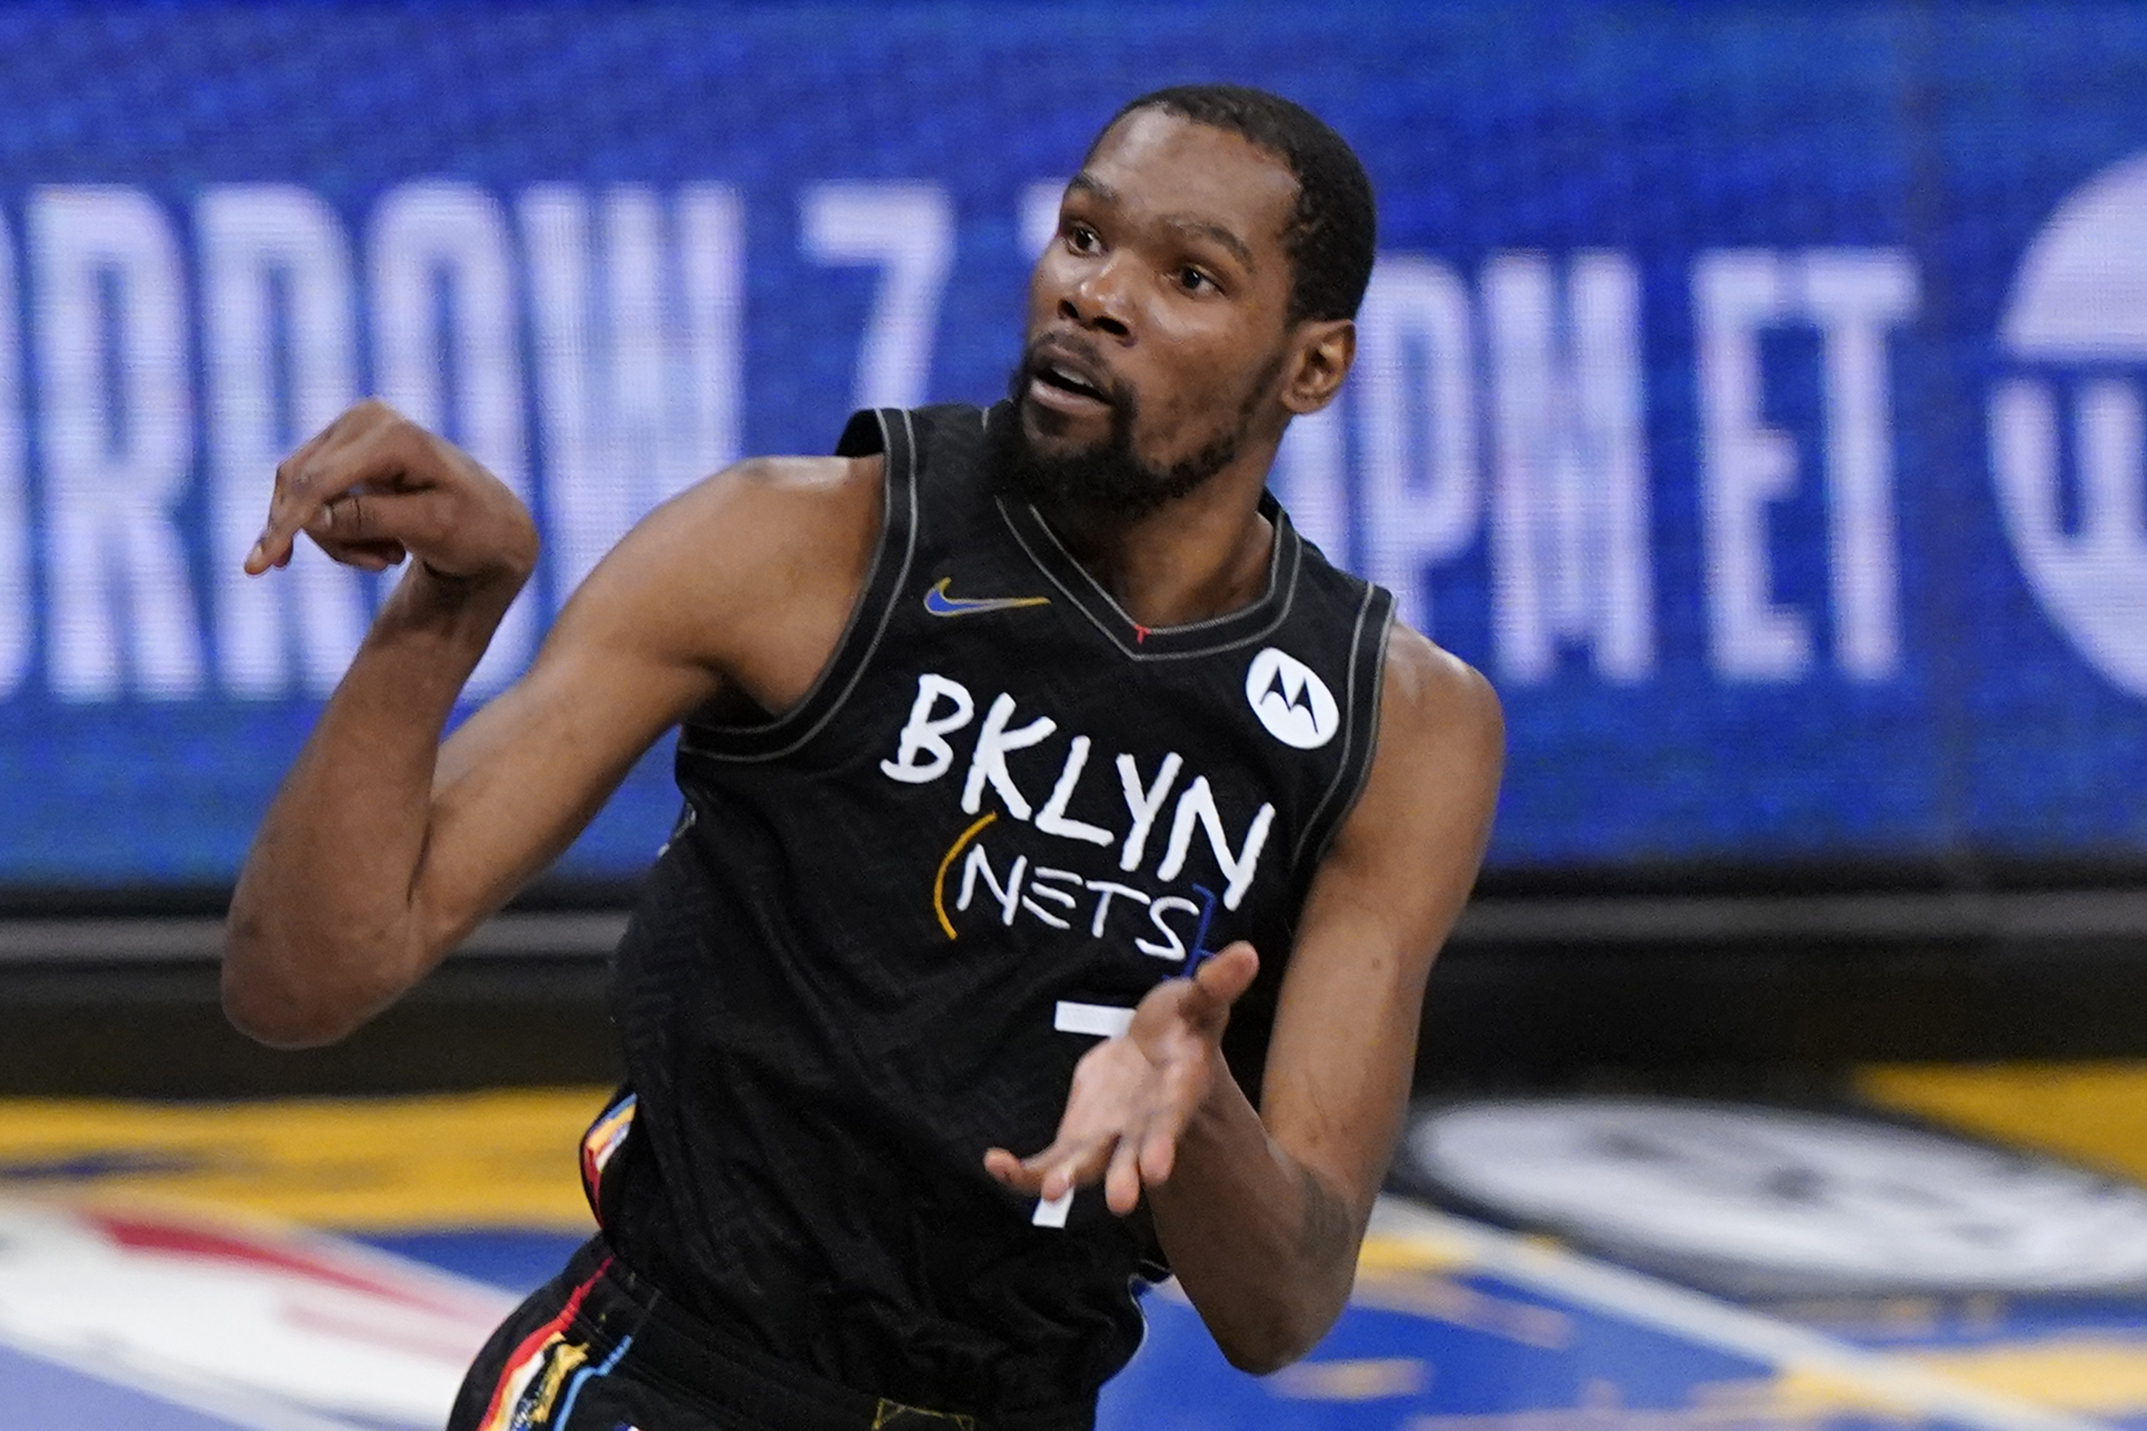 kevin durant nets  Kevin durant, Nba pictures, Best nba players